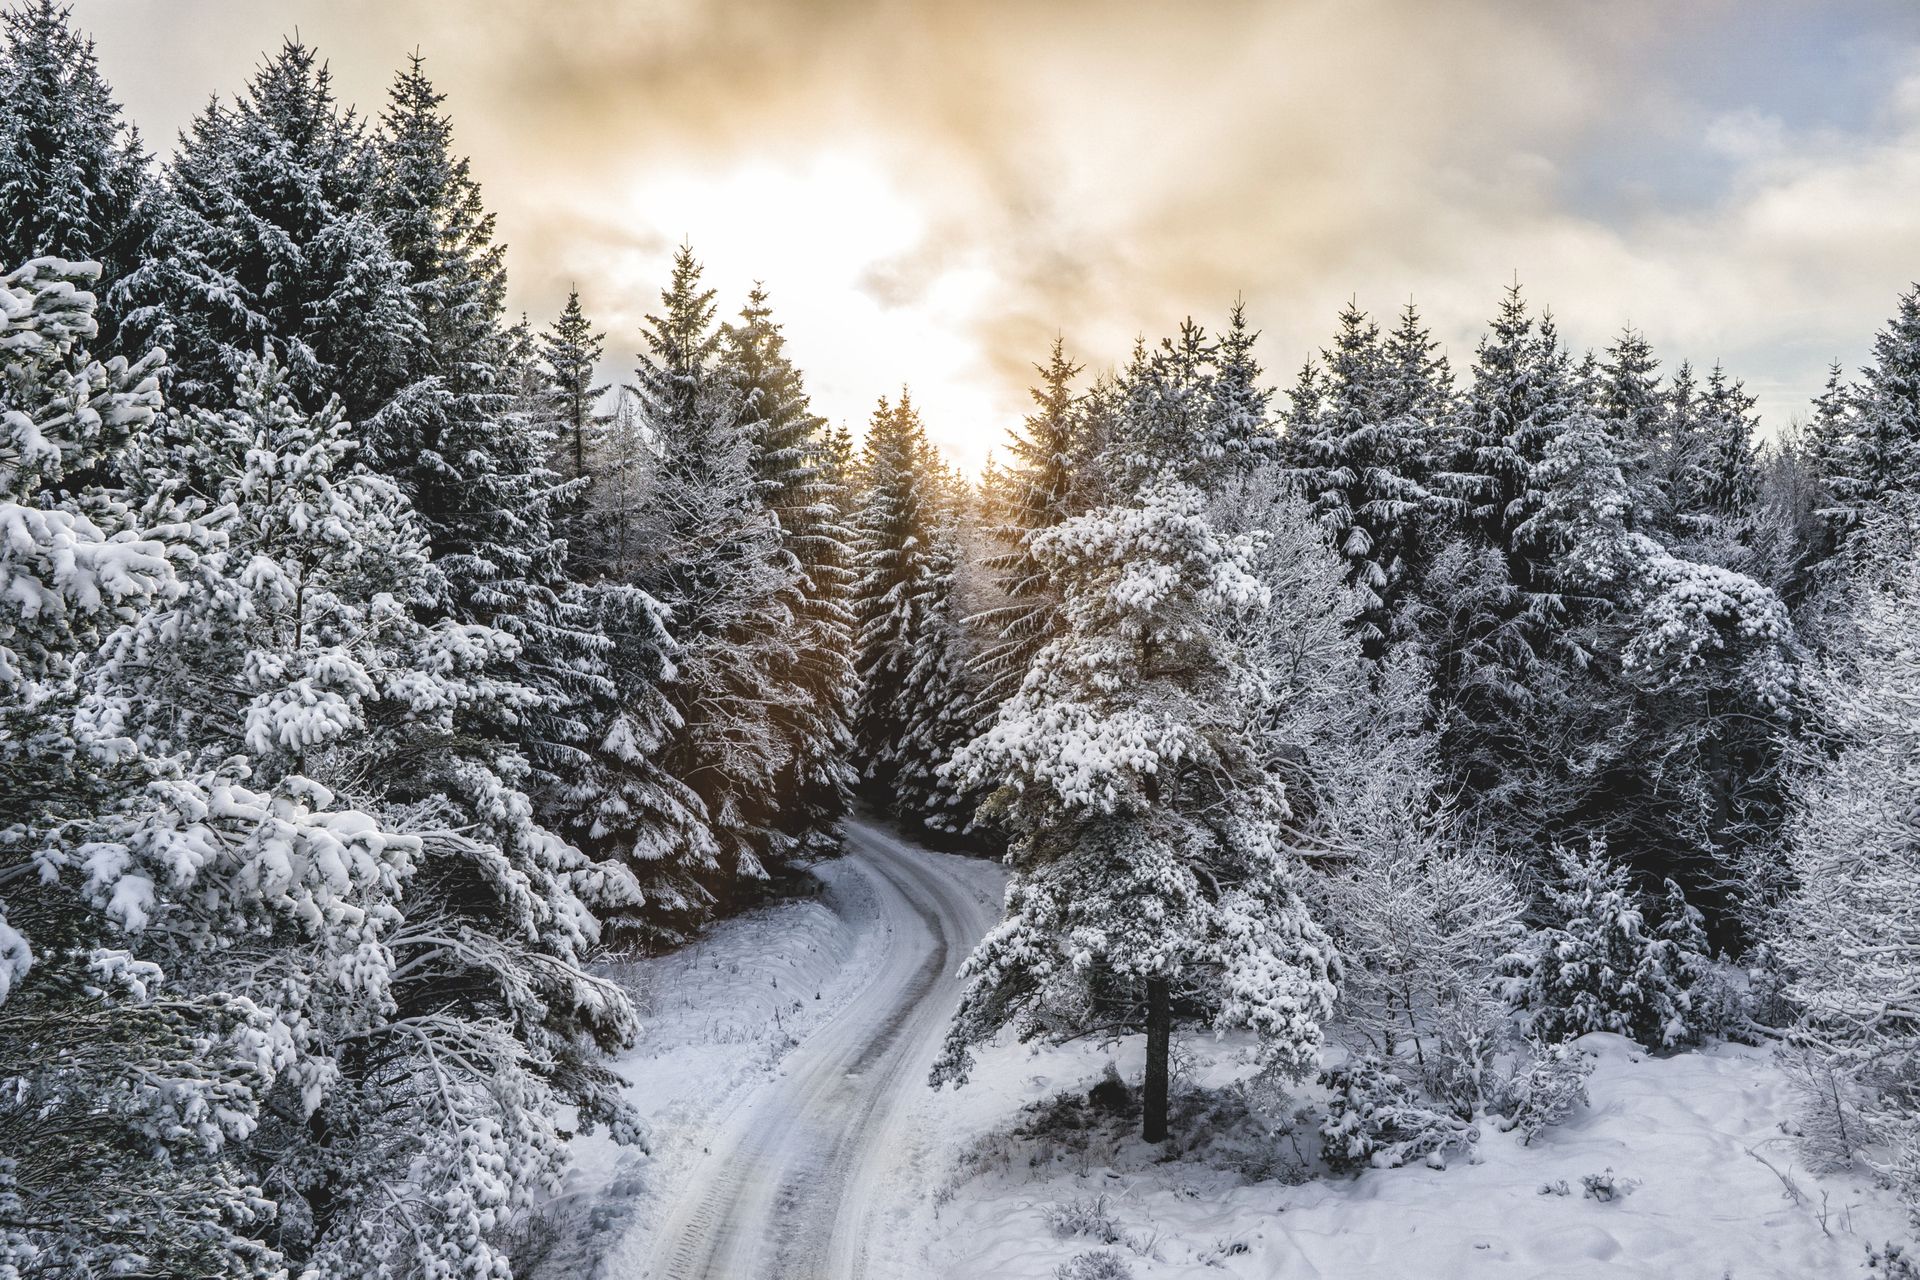 An image of a winterforest with a lot of snow on the trees, and a snowy road in the middle